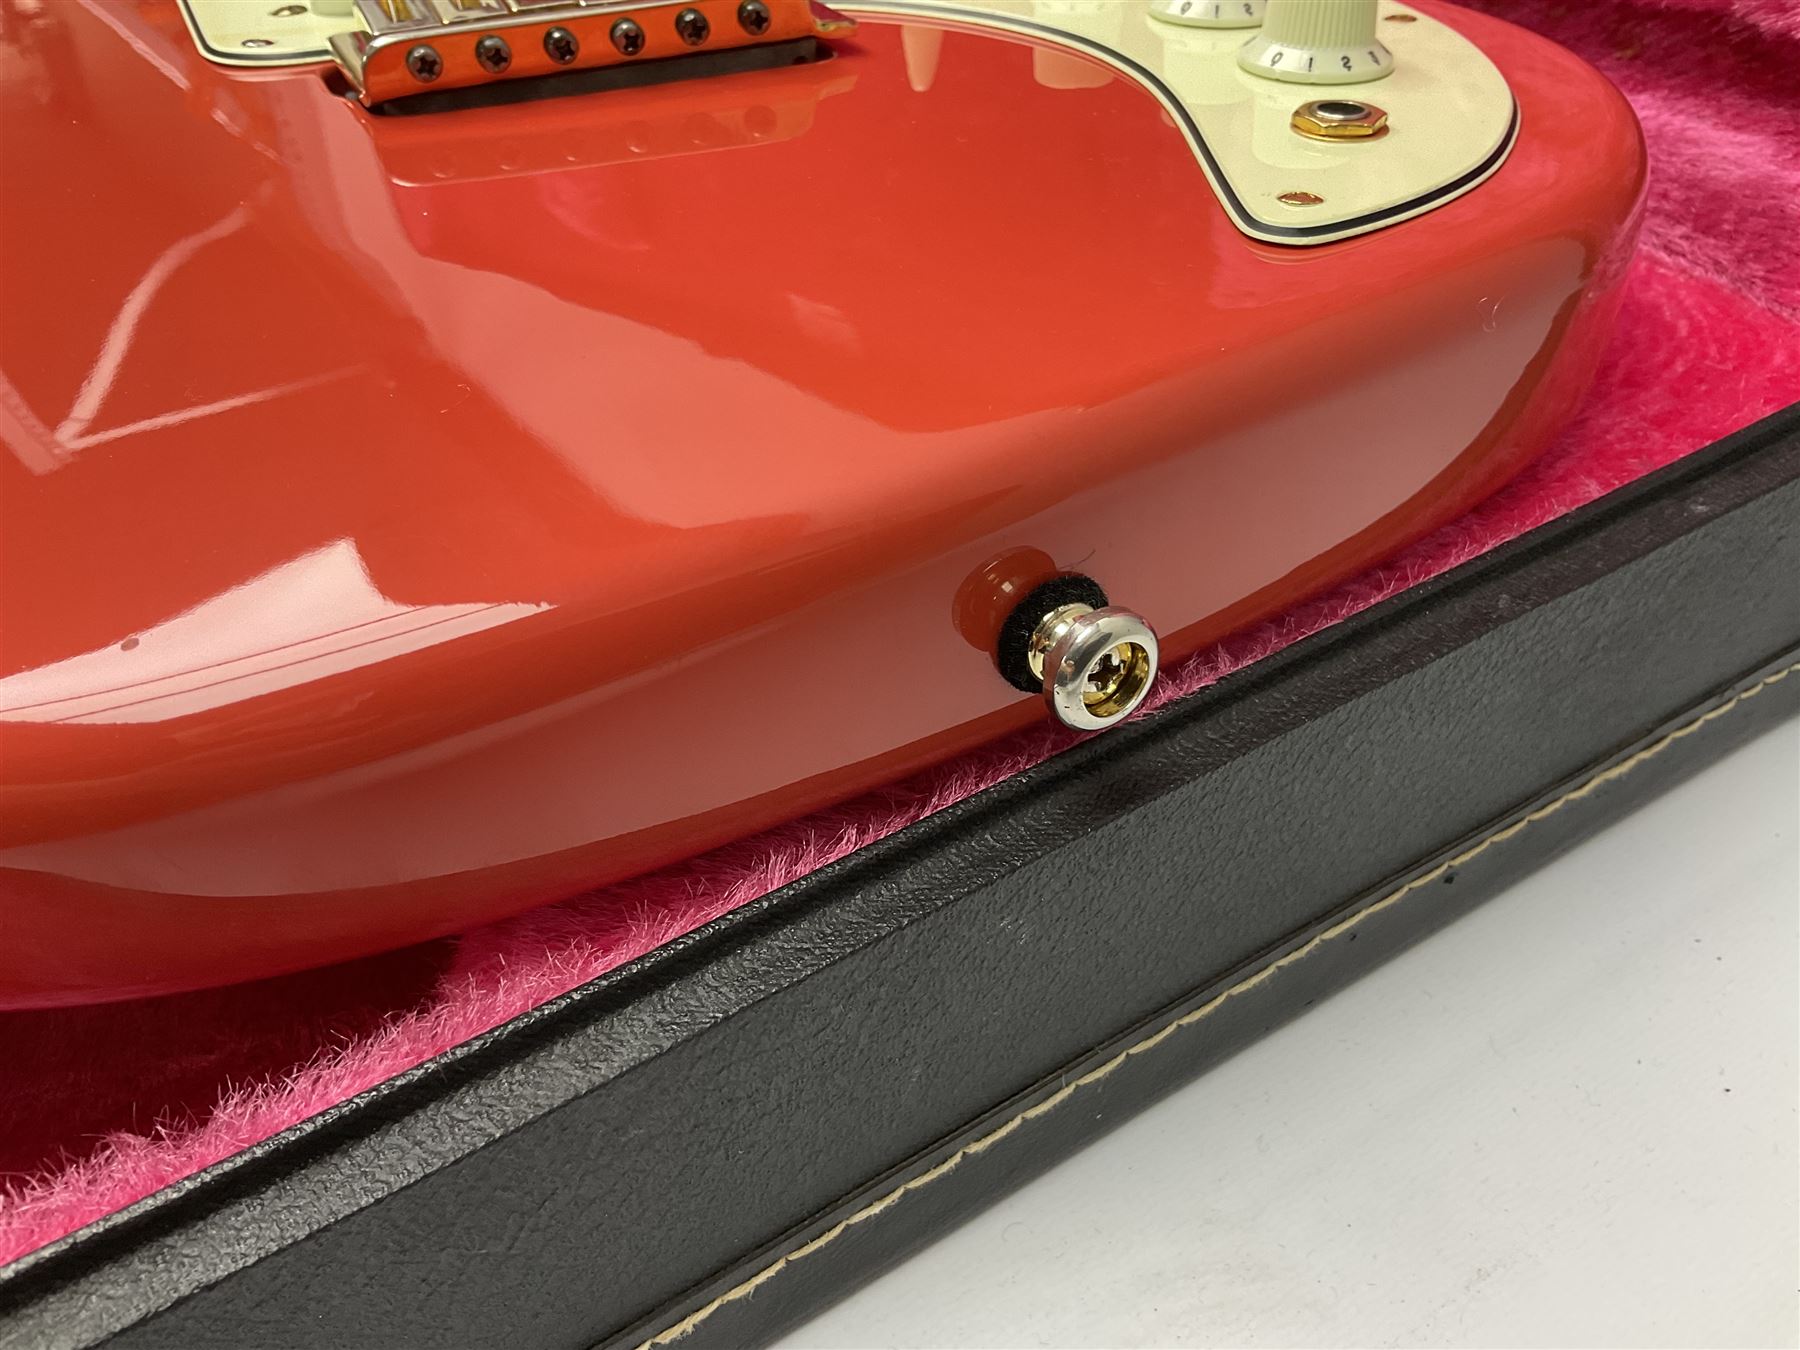 Burns Club Series Marquee electric guitar in fiesta red with maple fretboard; serial no.2002491 L100 - Image 13 of 17